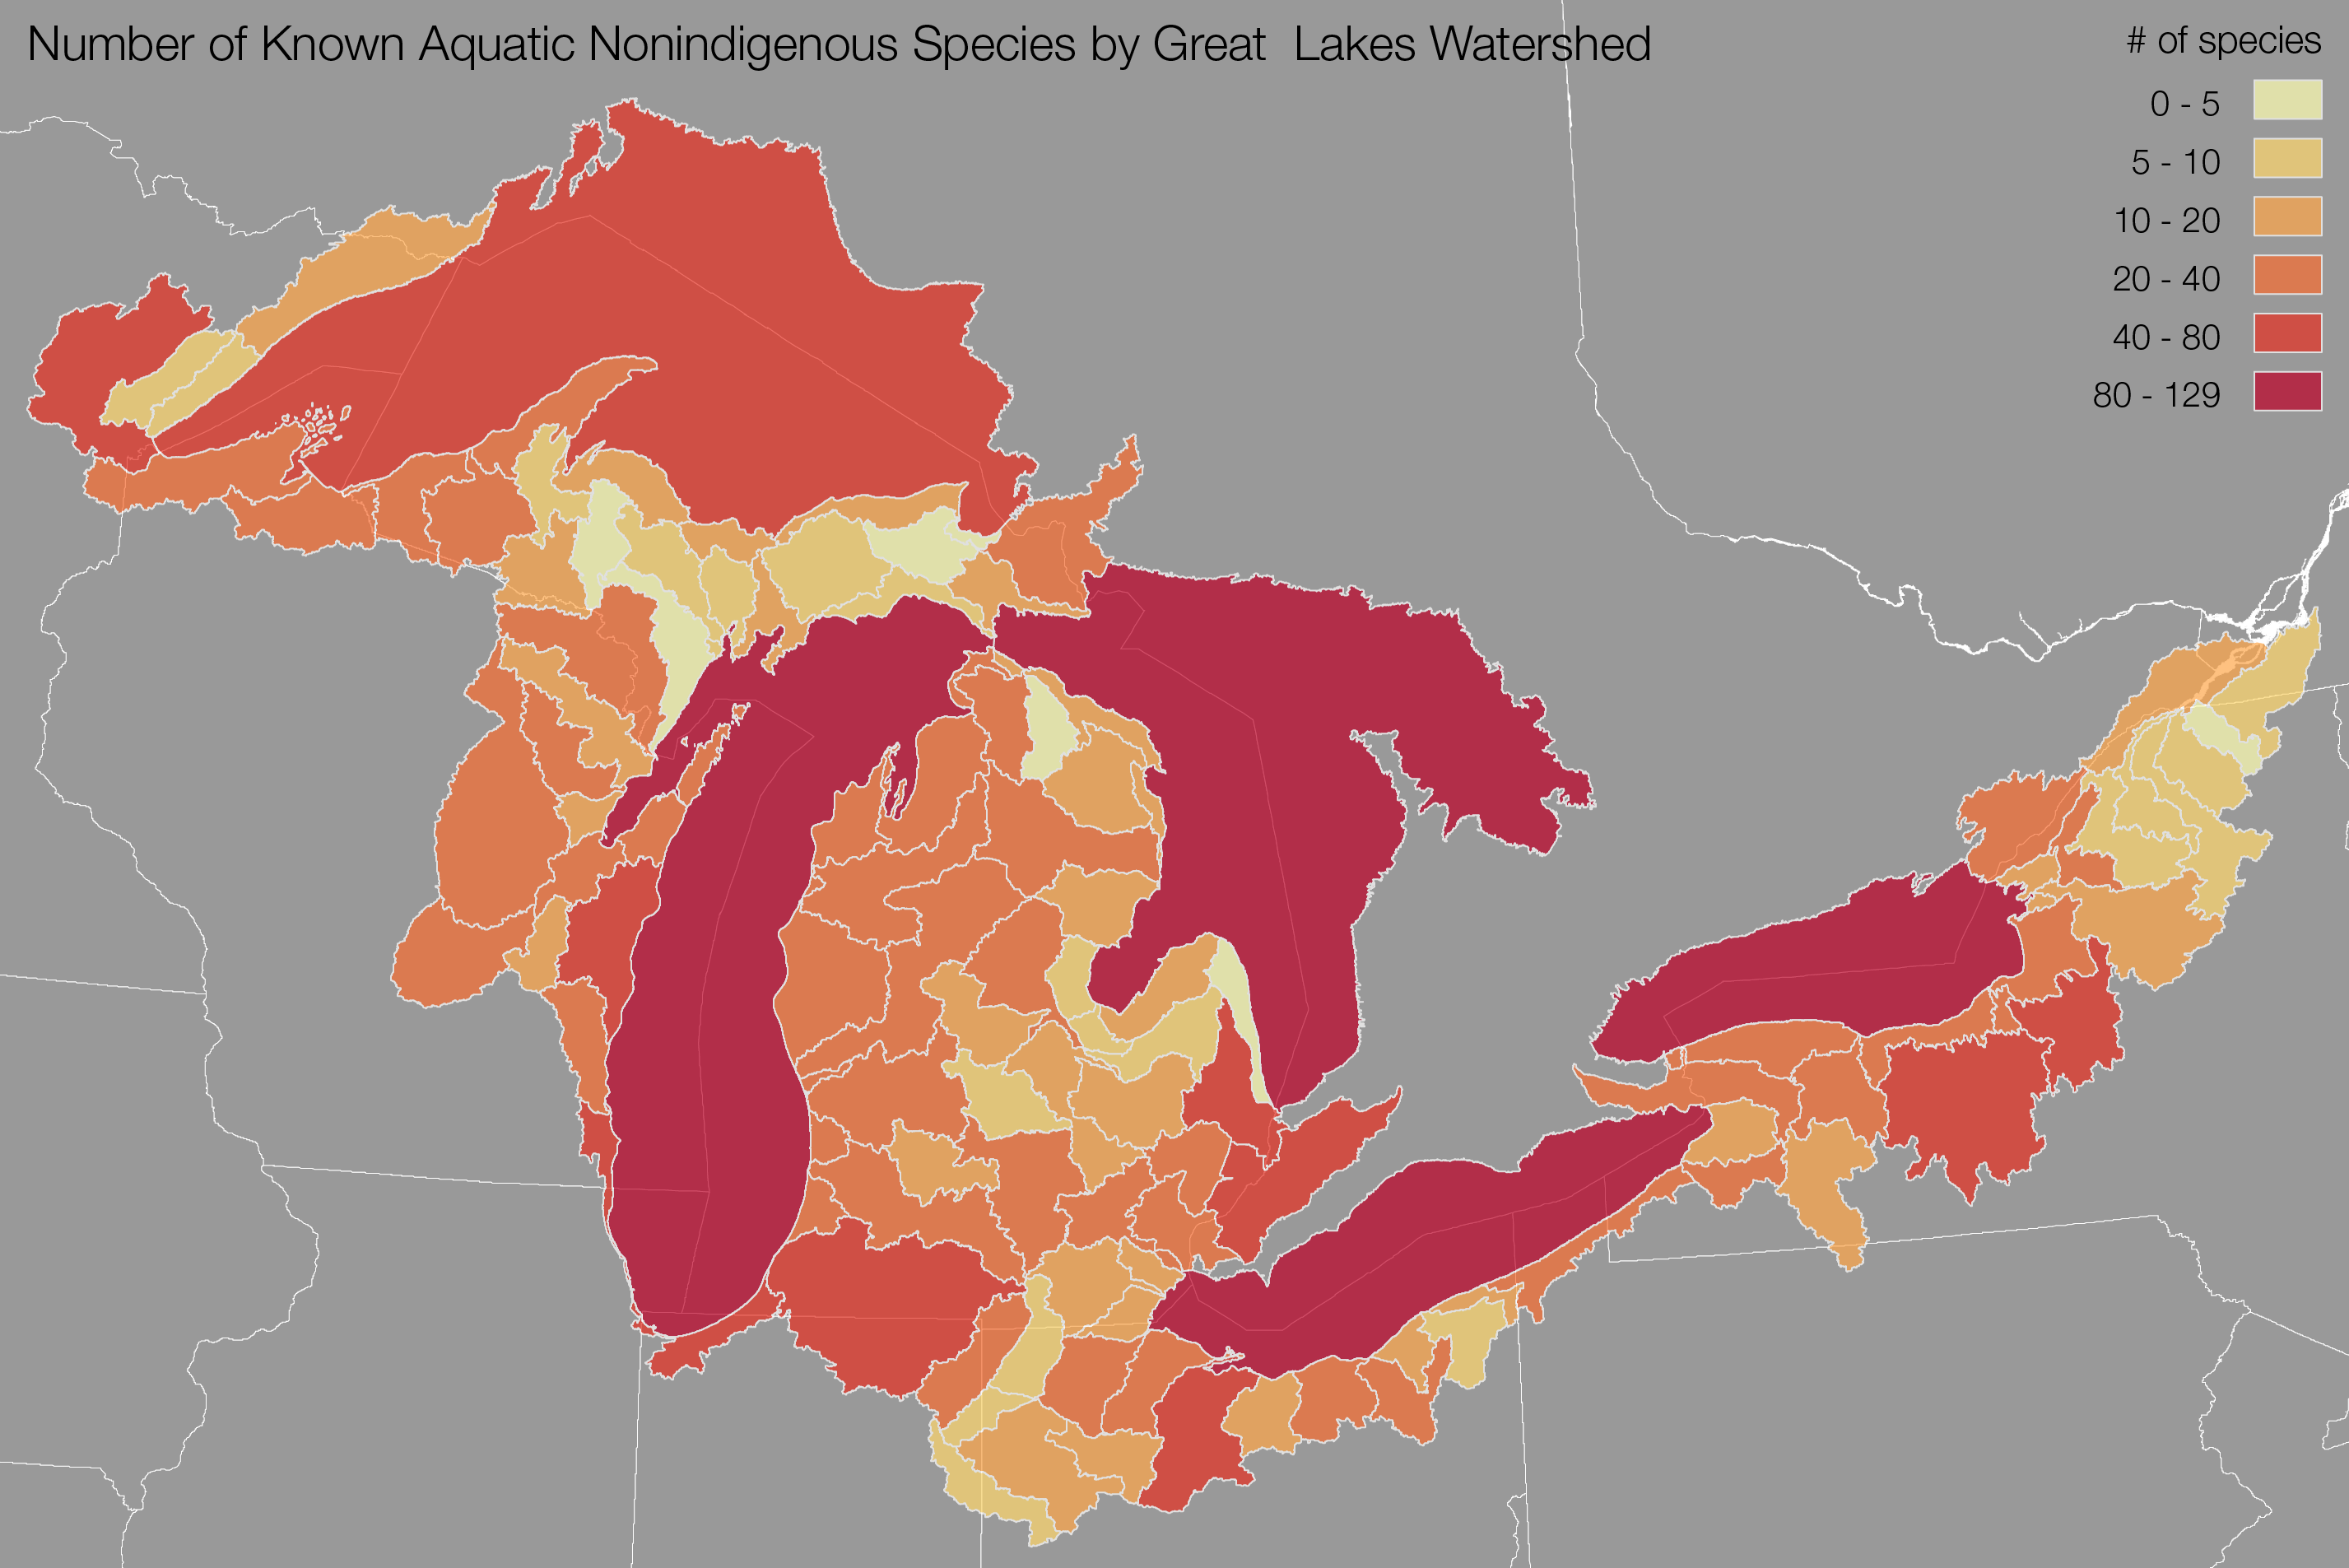 2018 Heat Map - Number of Aquatic Nonindigenous Species by Great Lakes Watershed